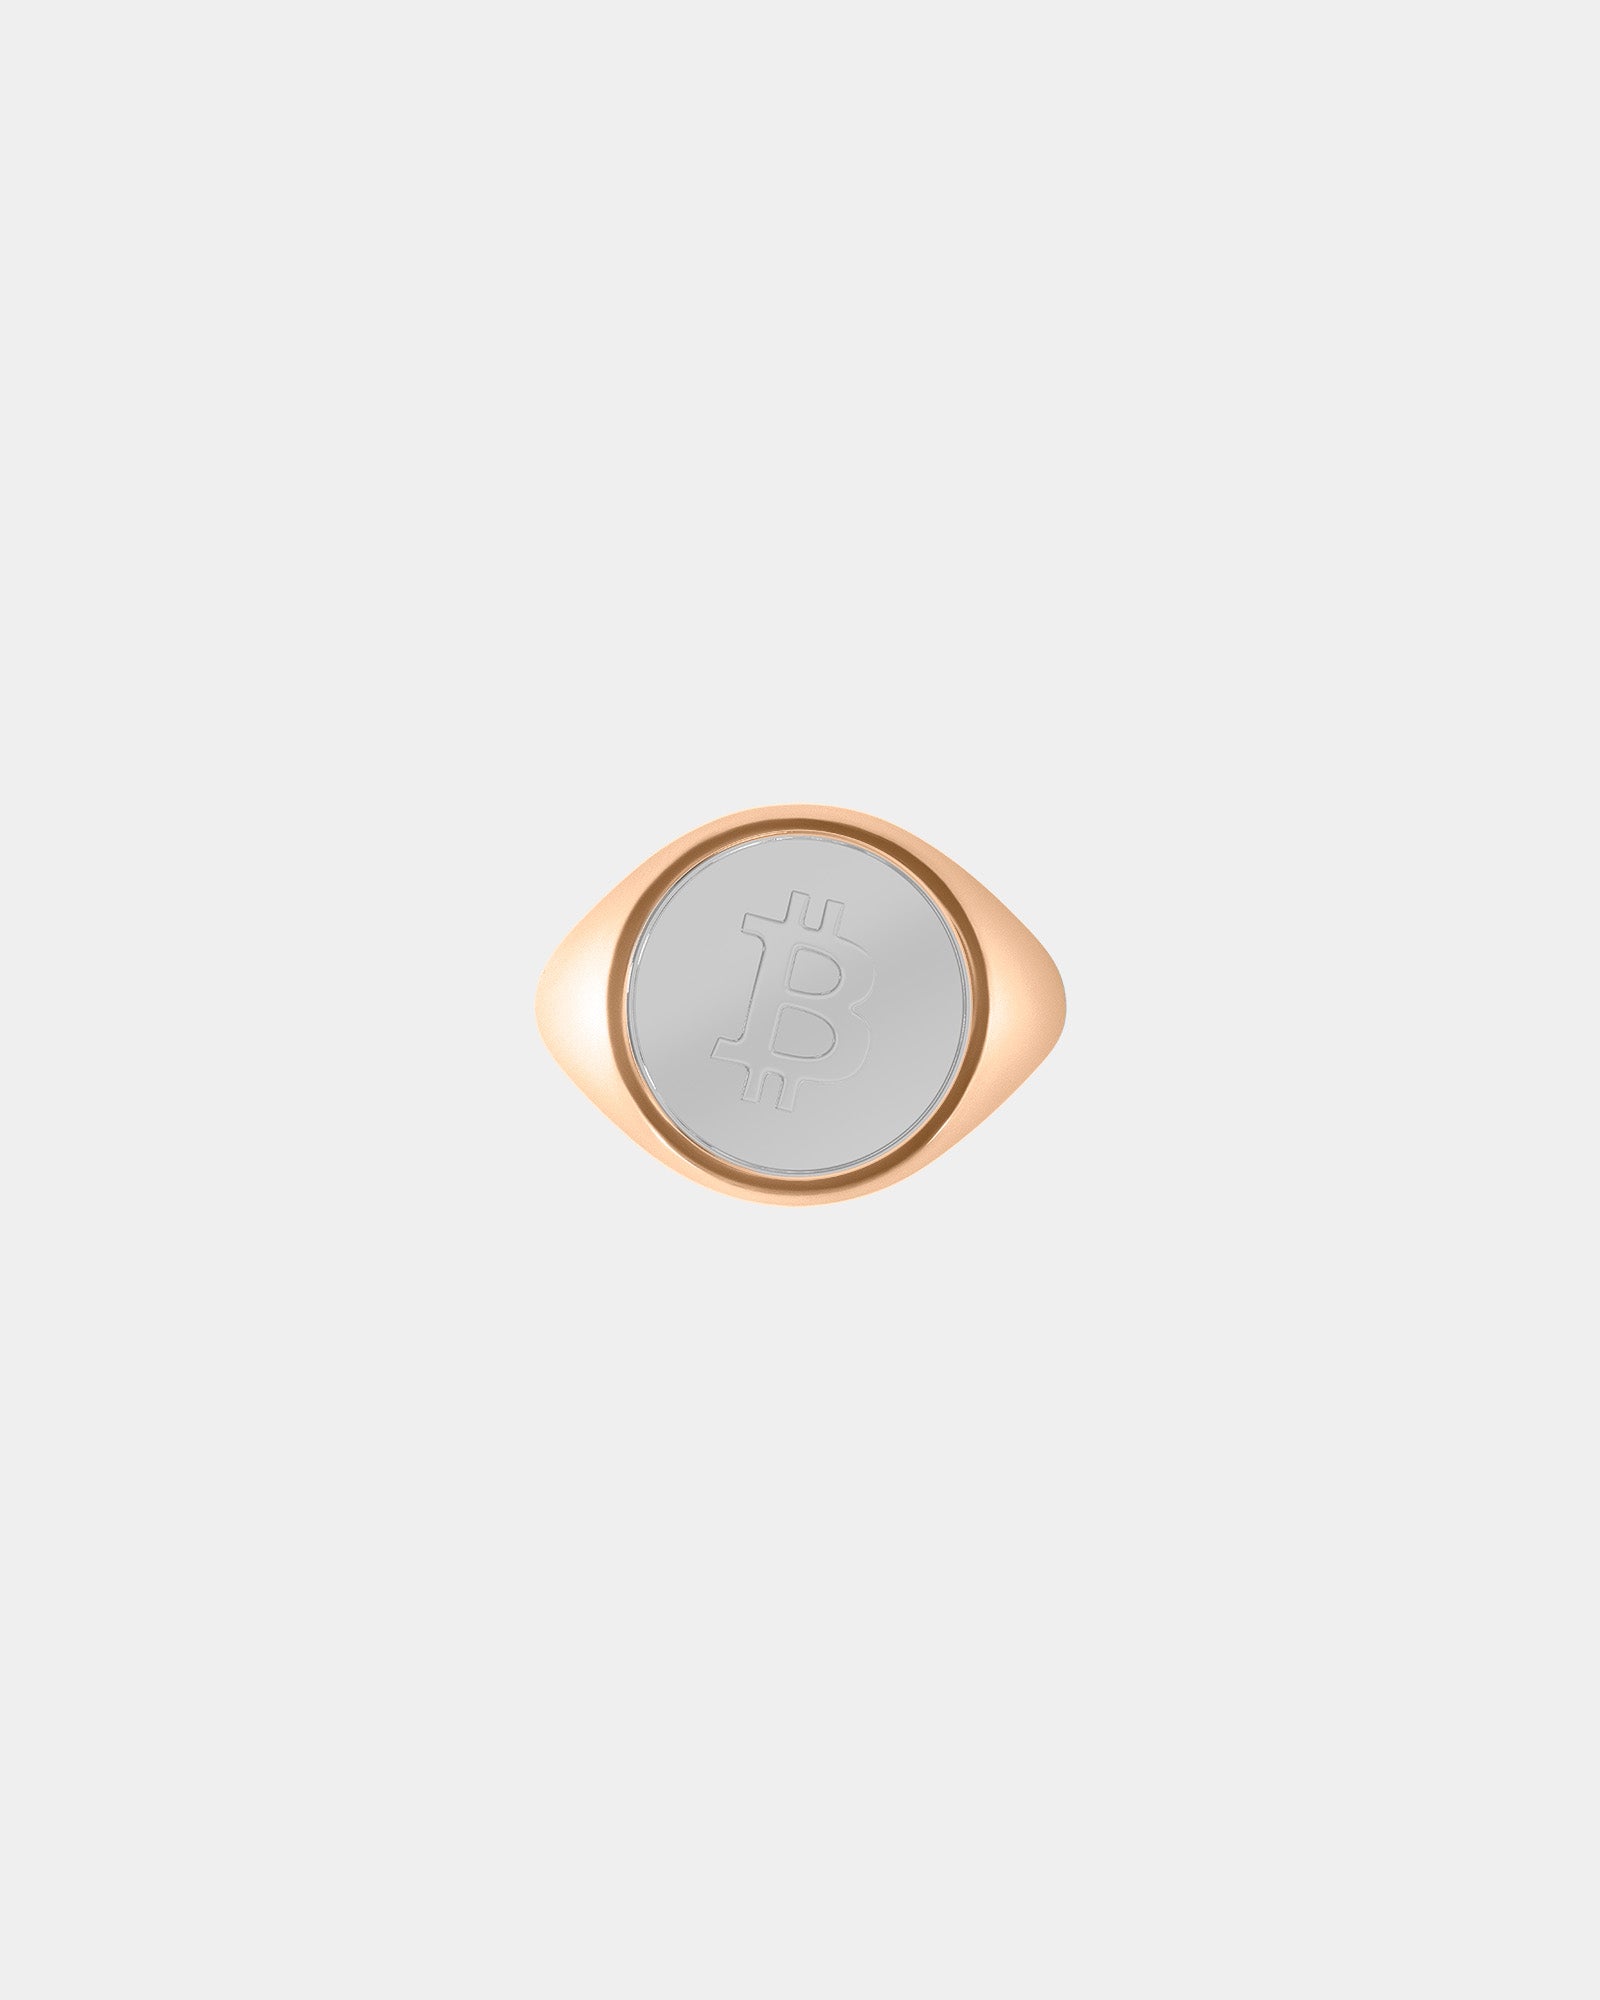 Large Bitcoin Crypto Ring in 9k Rose Gold / Sterling Silver by Wilson Grant